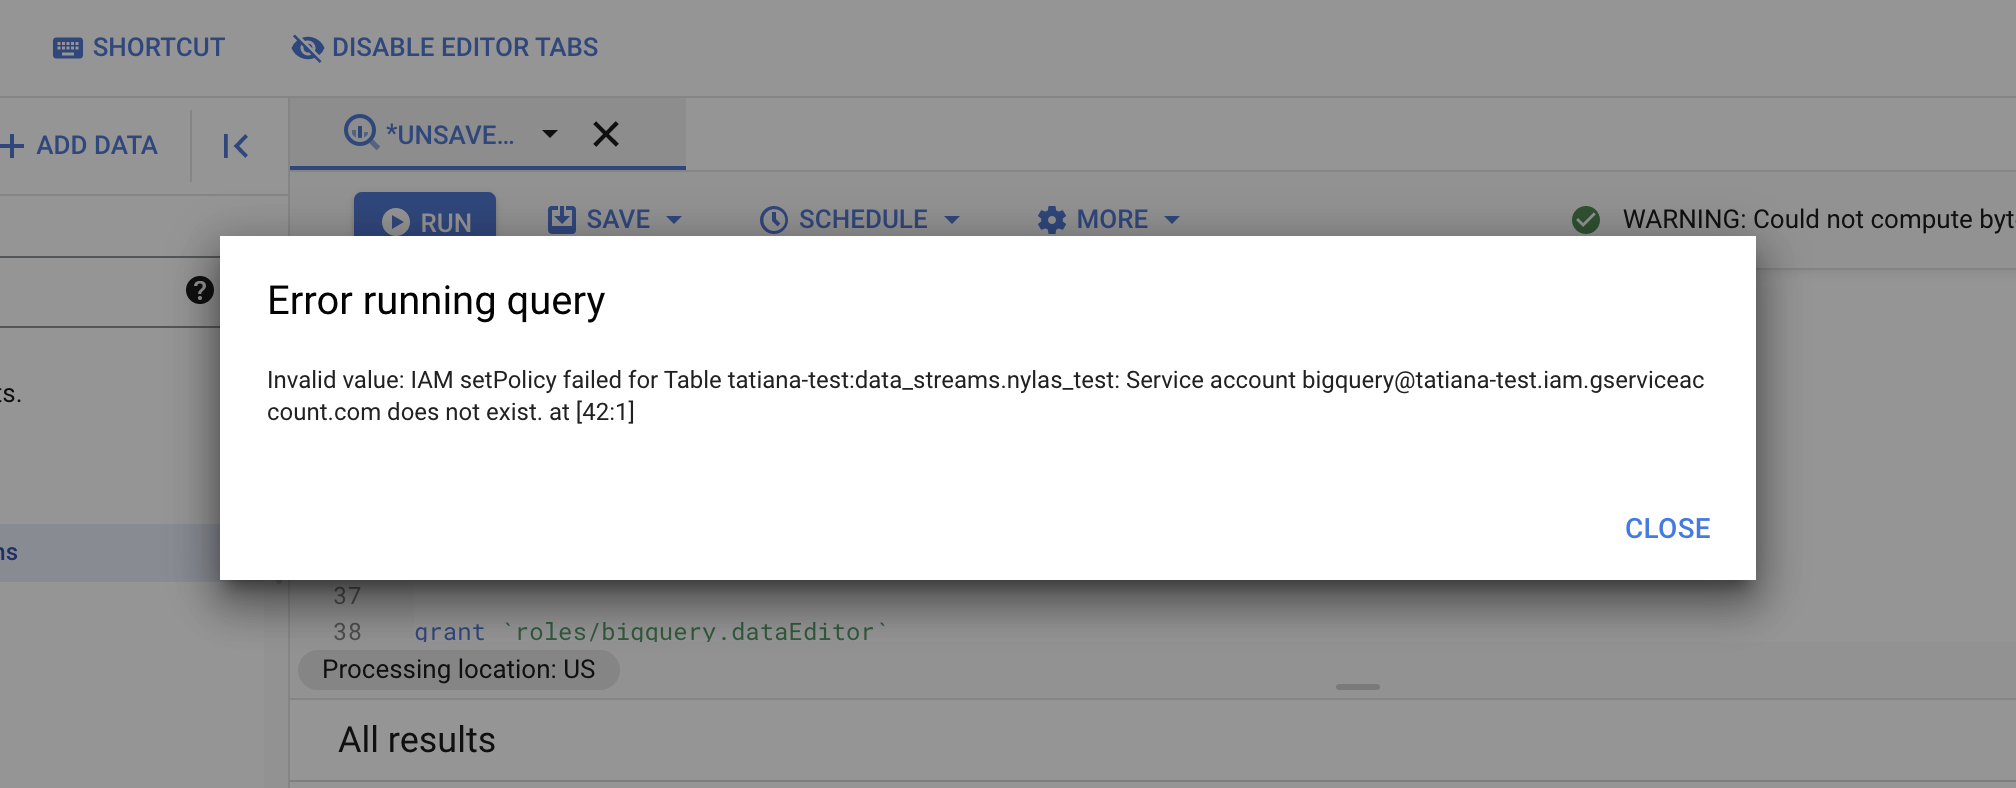 BigQuery console retuning the error: Invalid value: IAM setPolicy failed for Table